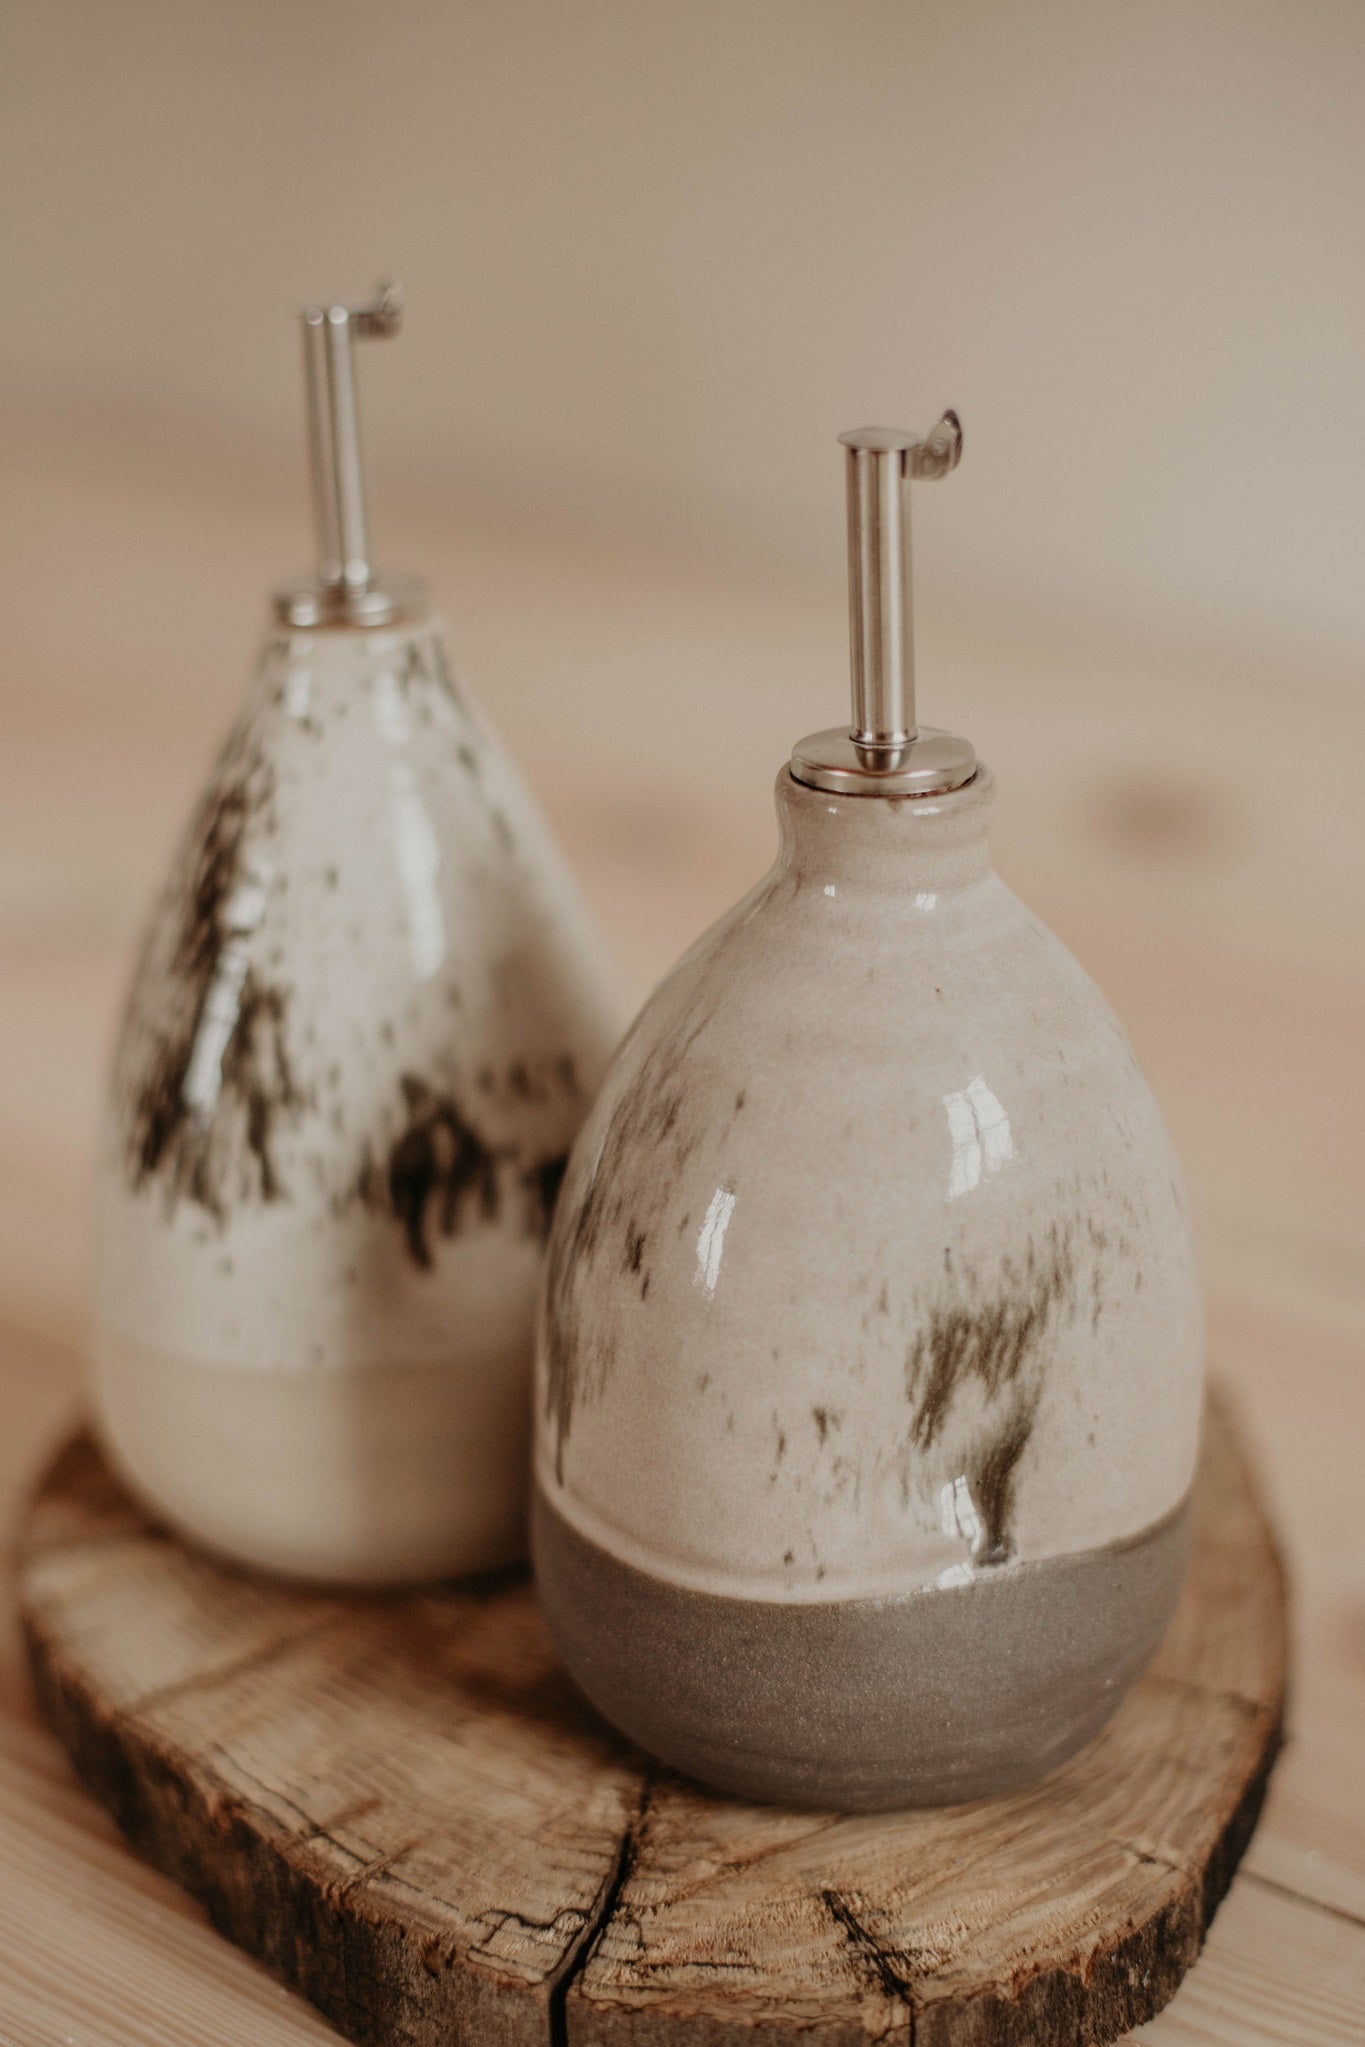 Made with love in a small pottery studio, each oil bottle is unique and handcrafted with care.